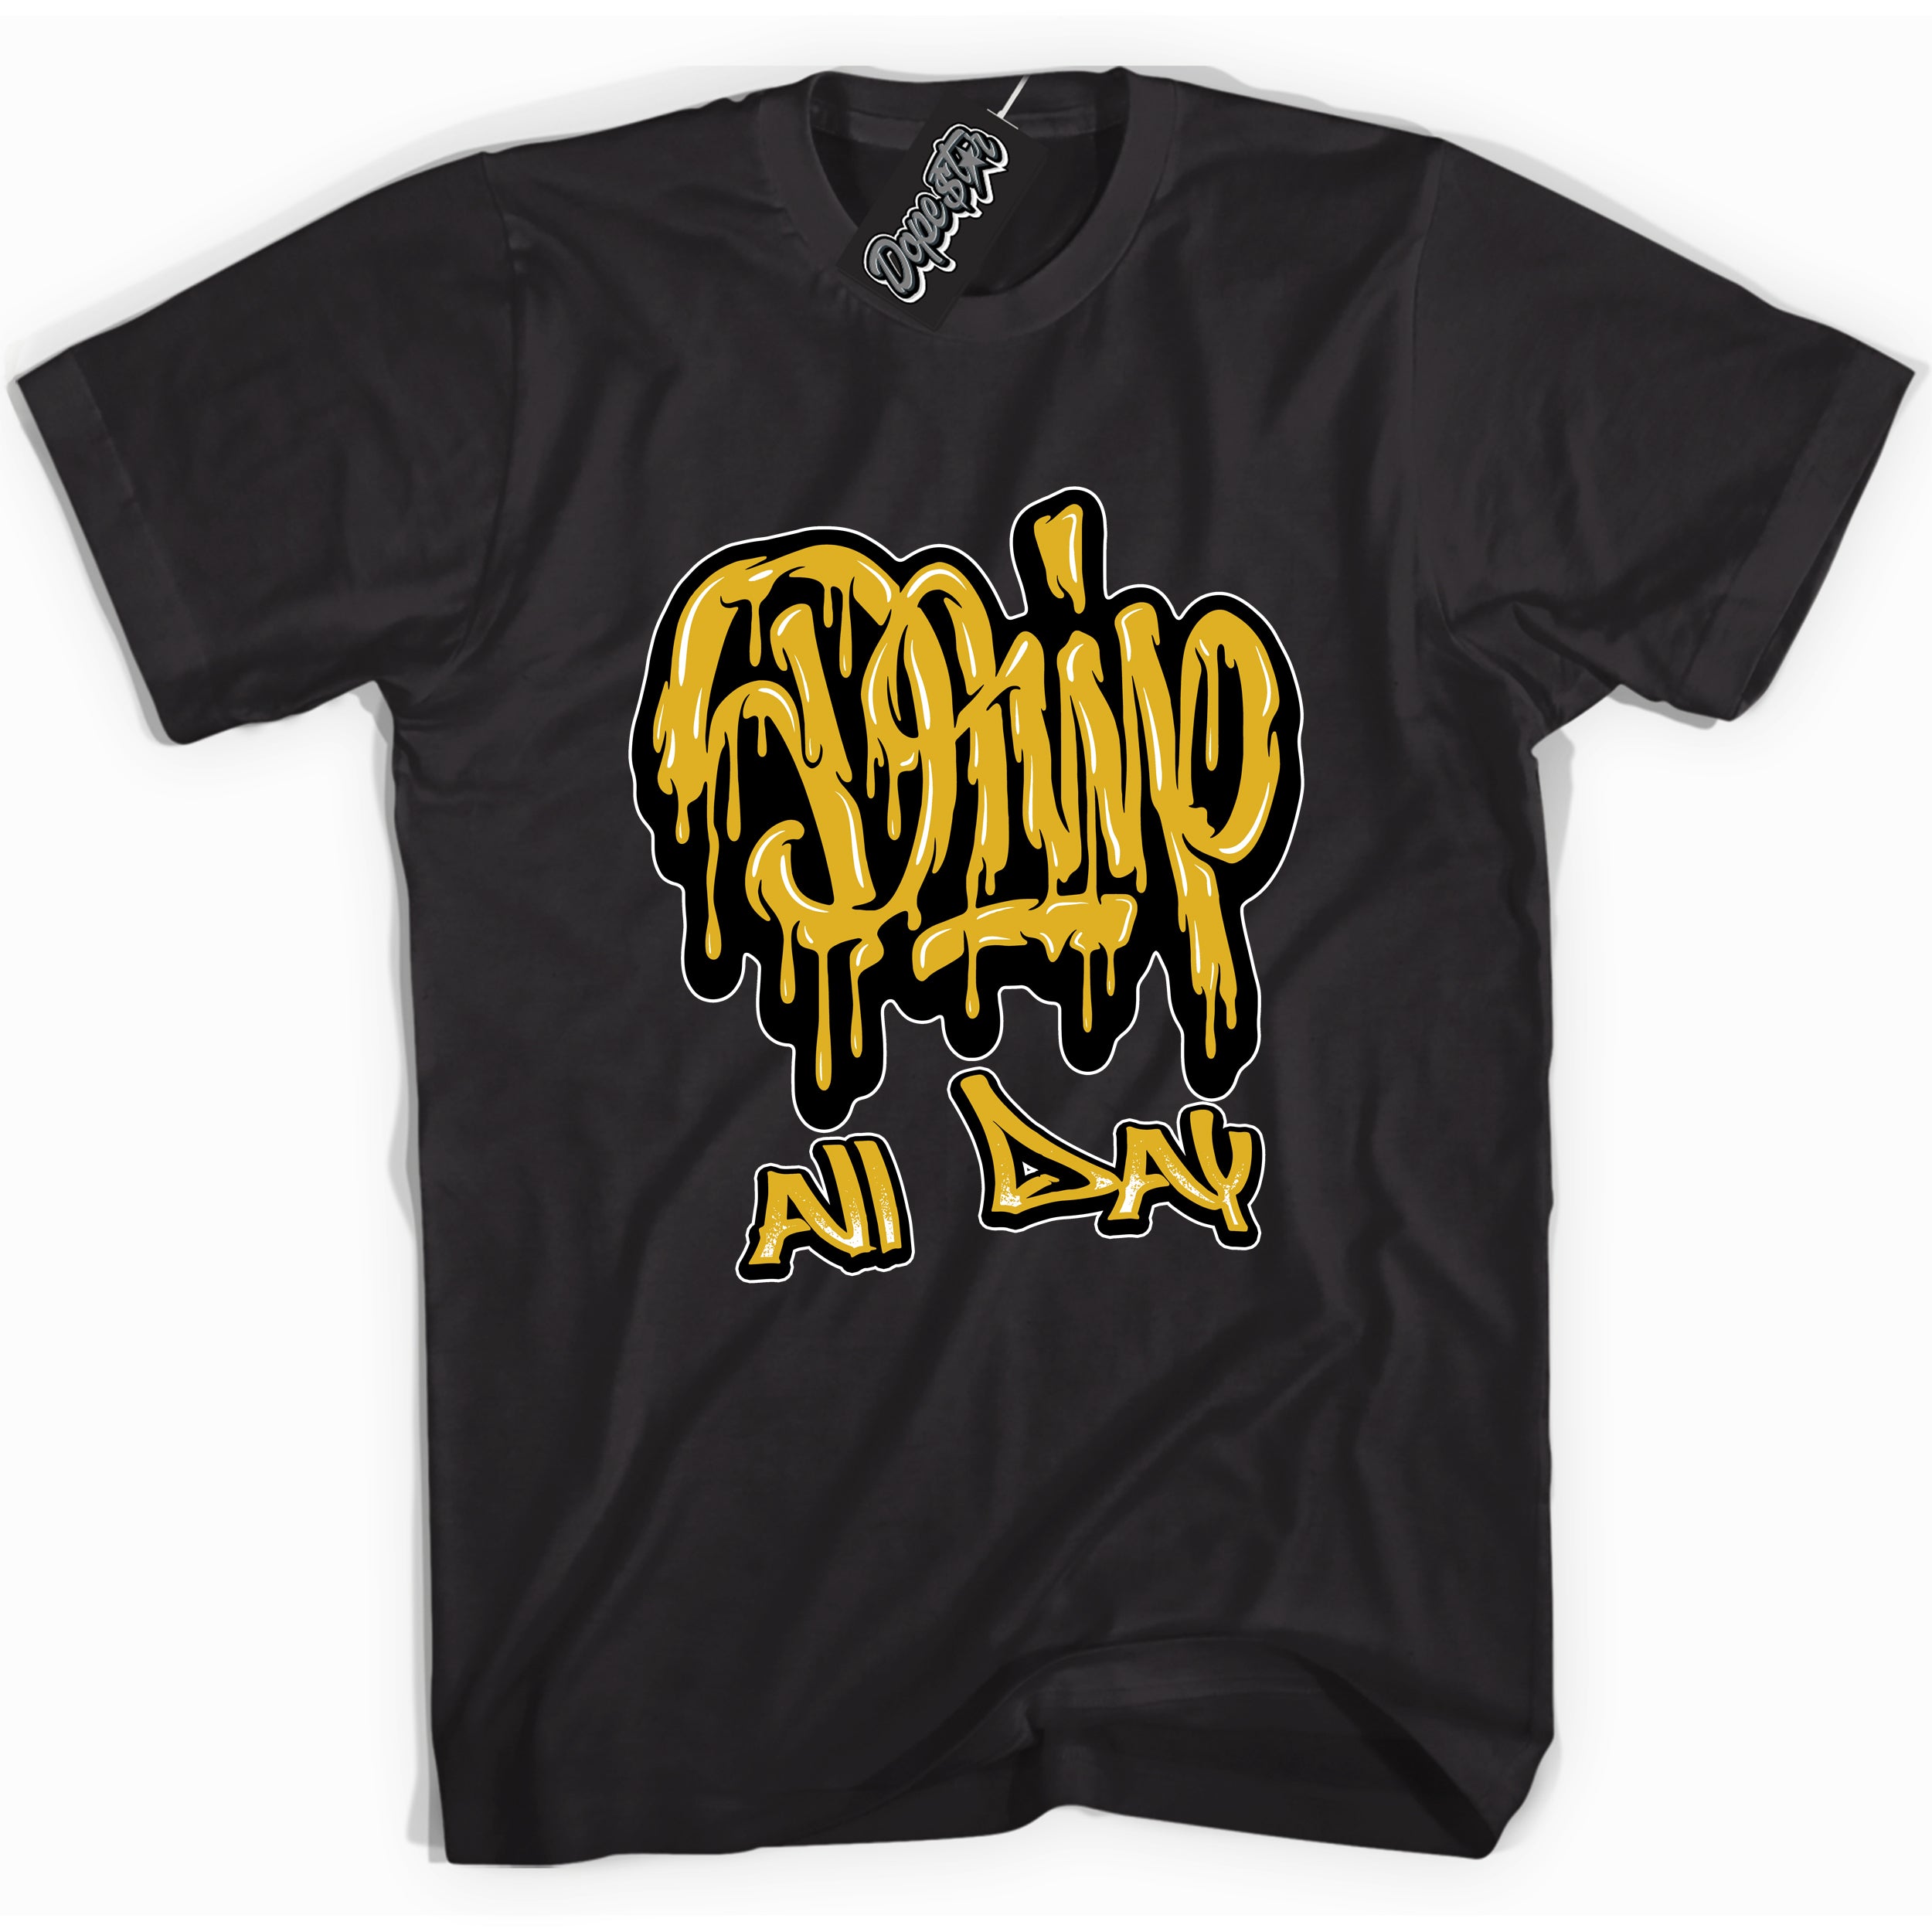 Cool Black Shirt with “ Drip All Day ” design that perfectly matches Yellow Ochre 6s Sneakers.